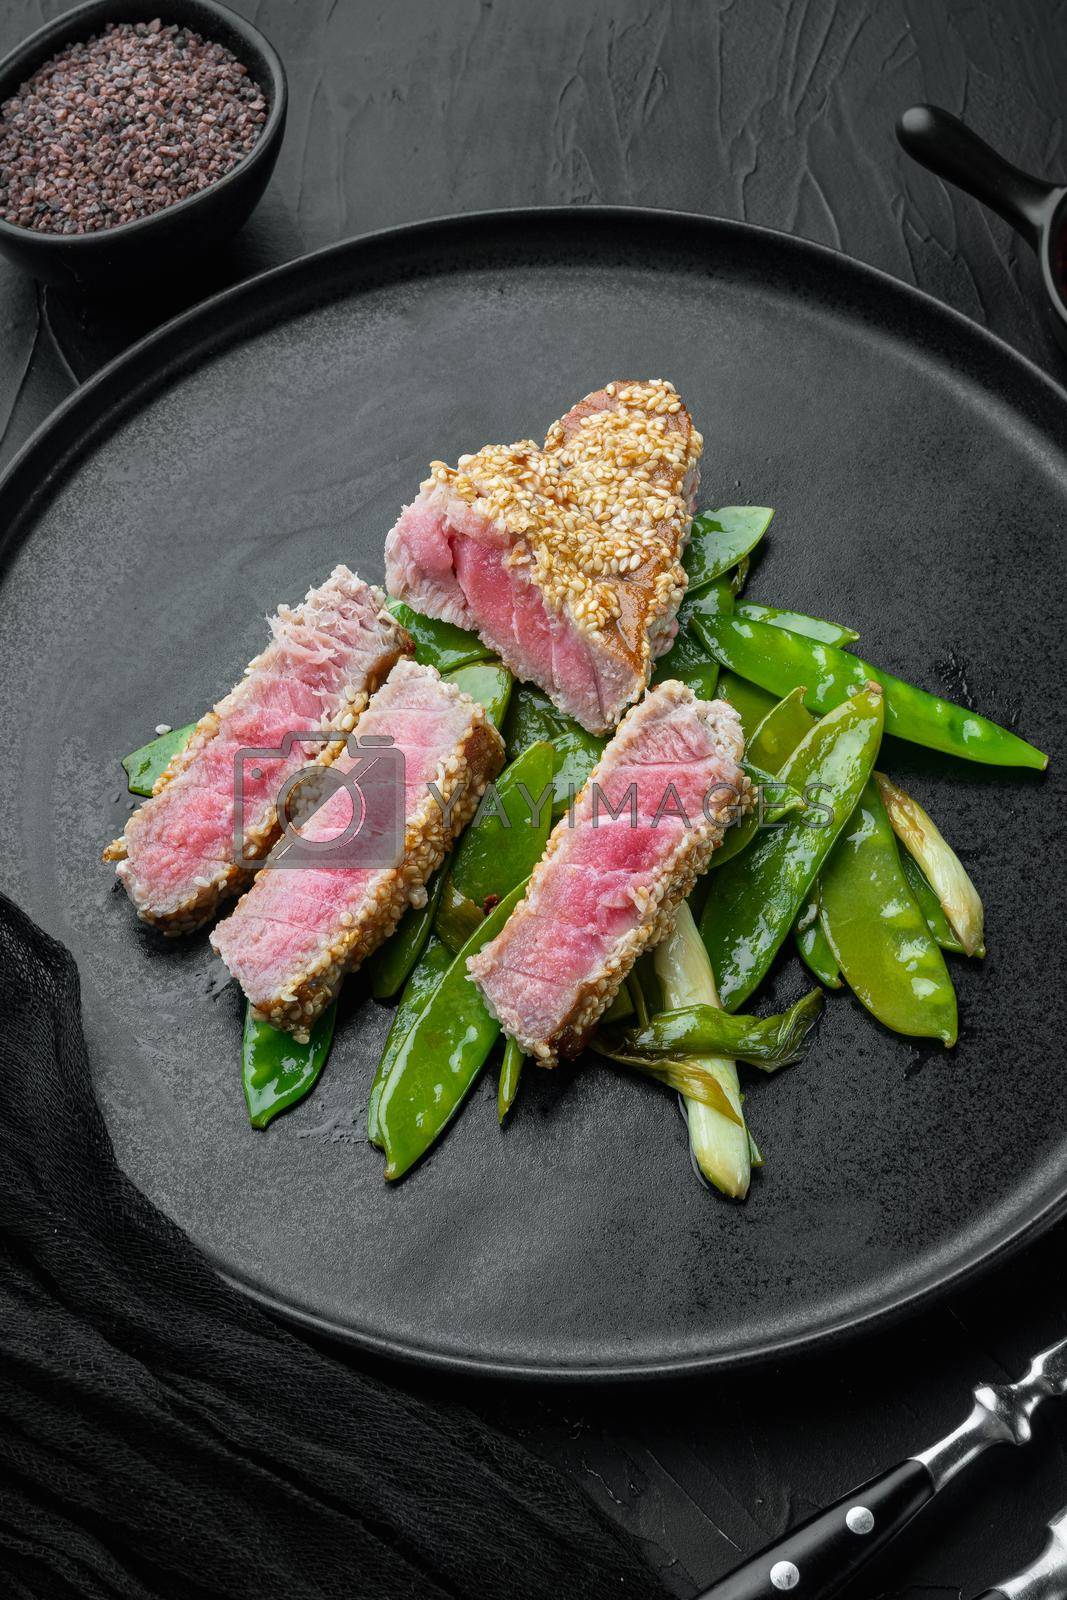 Royalty free image of Tuna steak grilled with spring onions and sugar snap peas , on plate, on black stone background by Ilianesolenyi